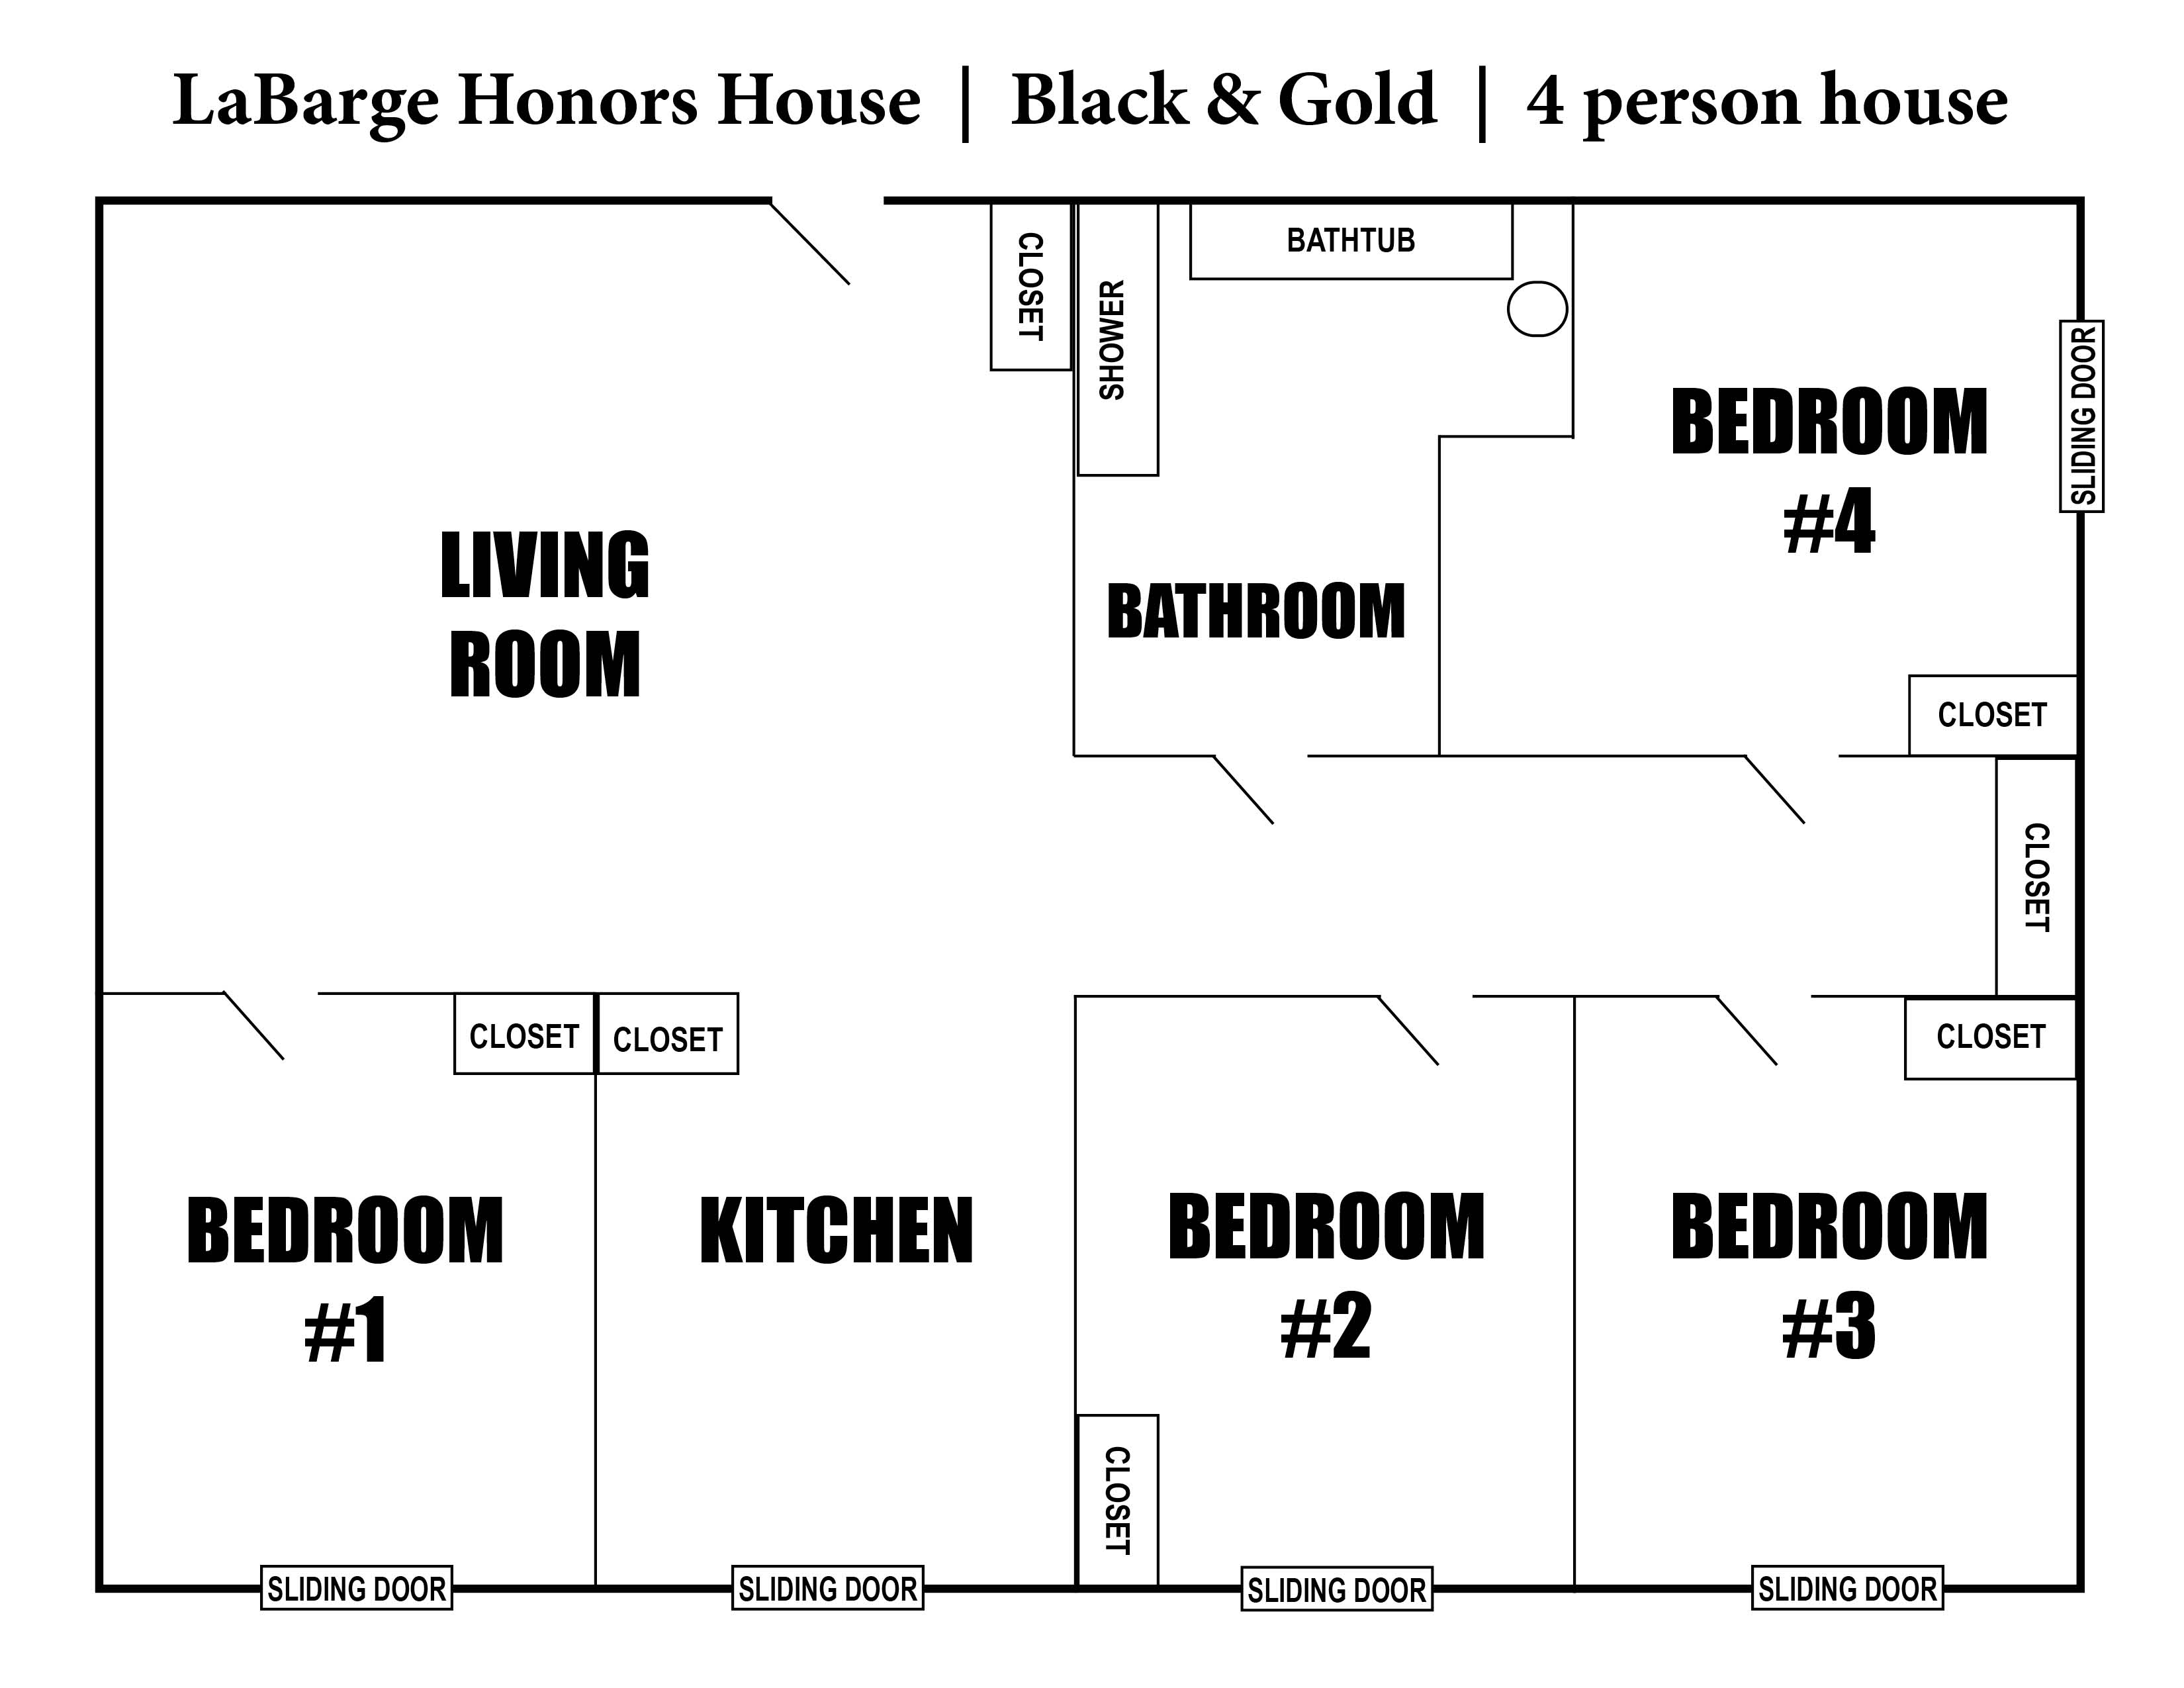 A photo of the layout of the LaBarge Honors House.